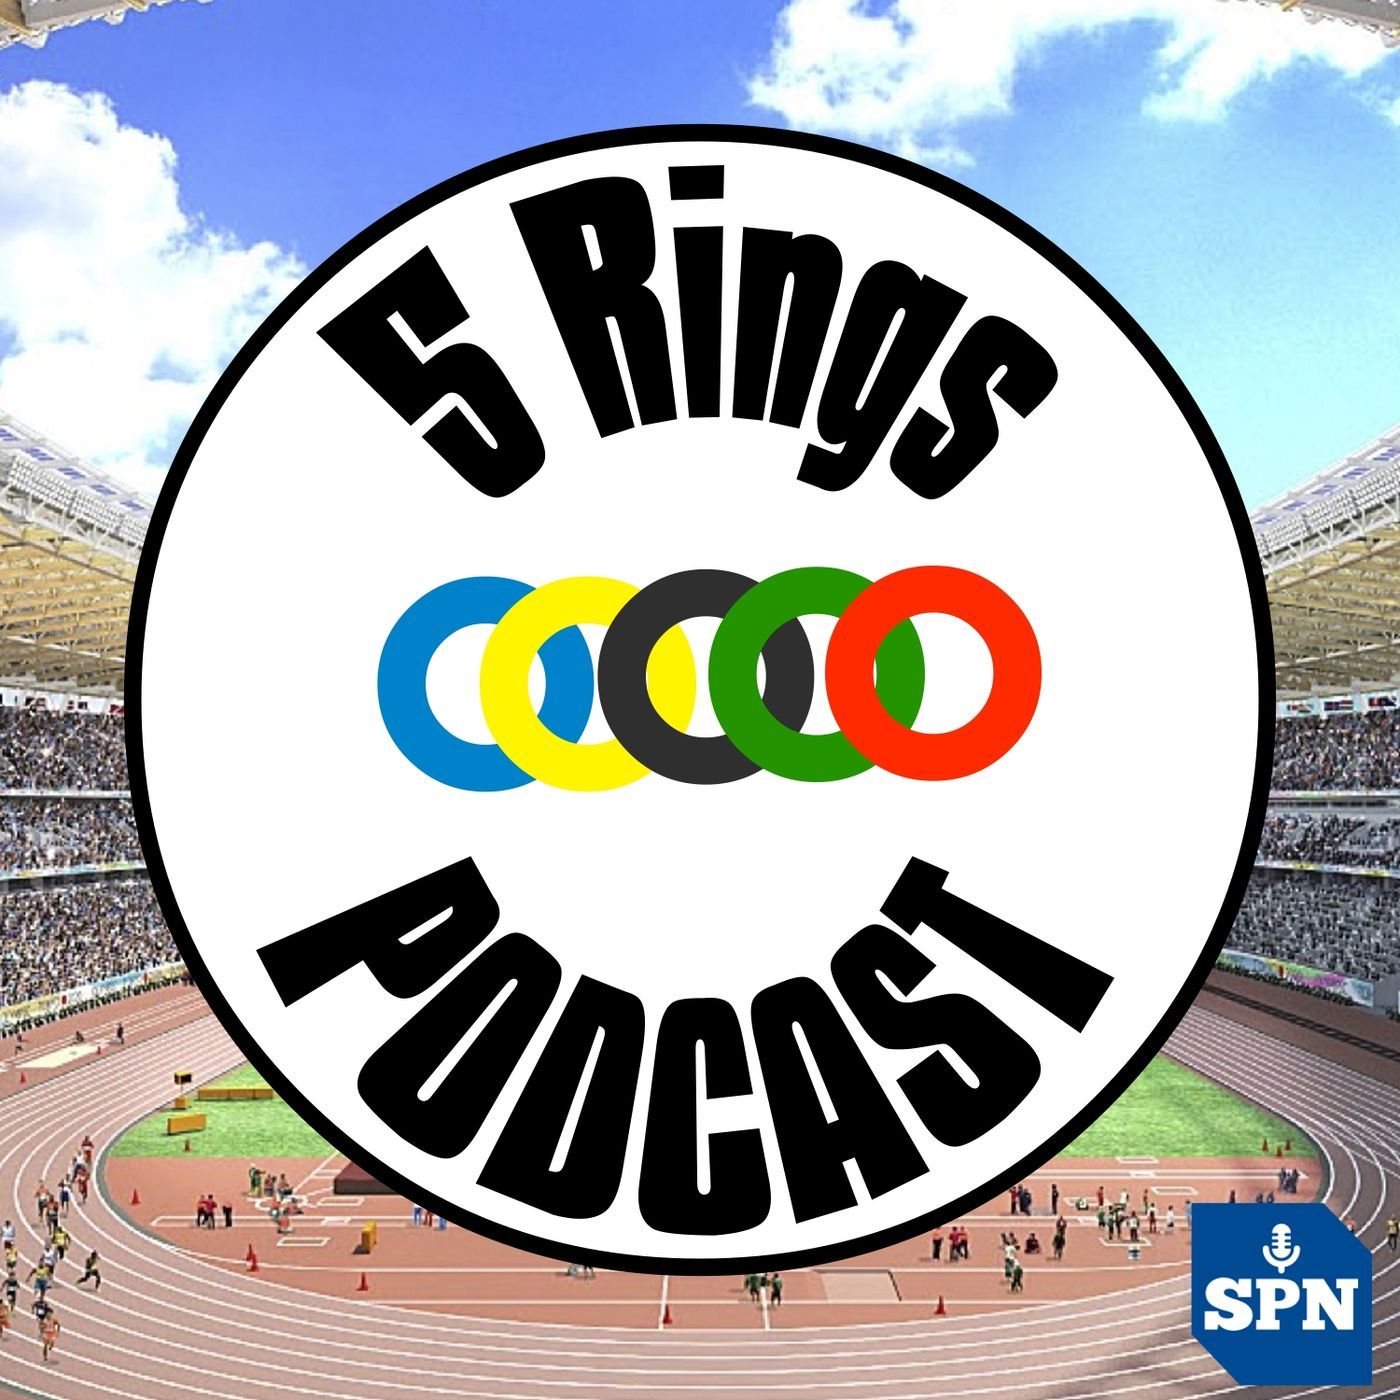 5 Rings Podcast - Daily Coverage of Tokyo 2020 with Kevin Laramee and Duane Rollins - Day 7 Review